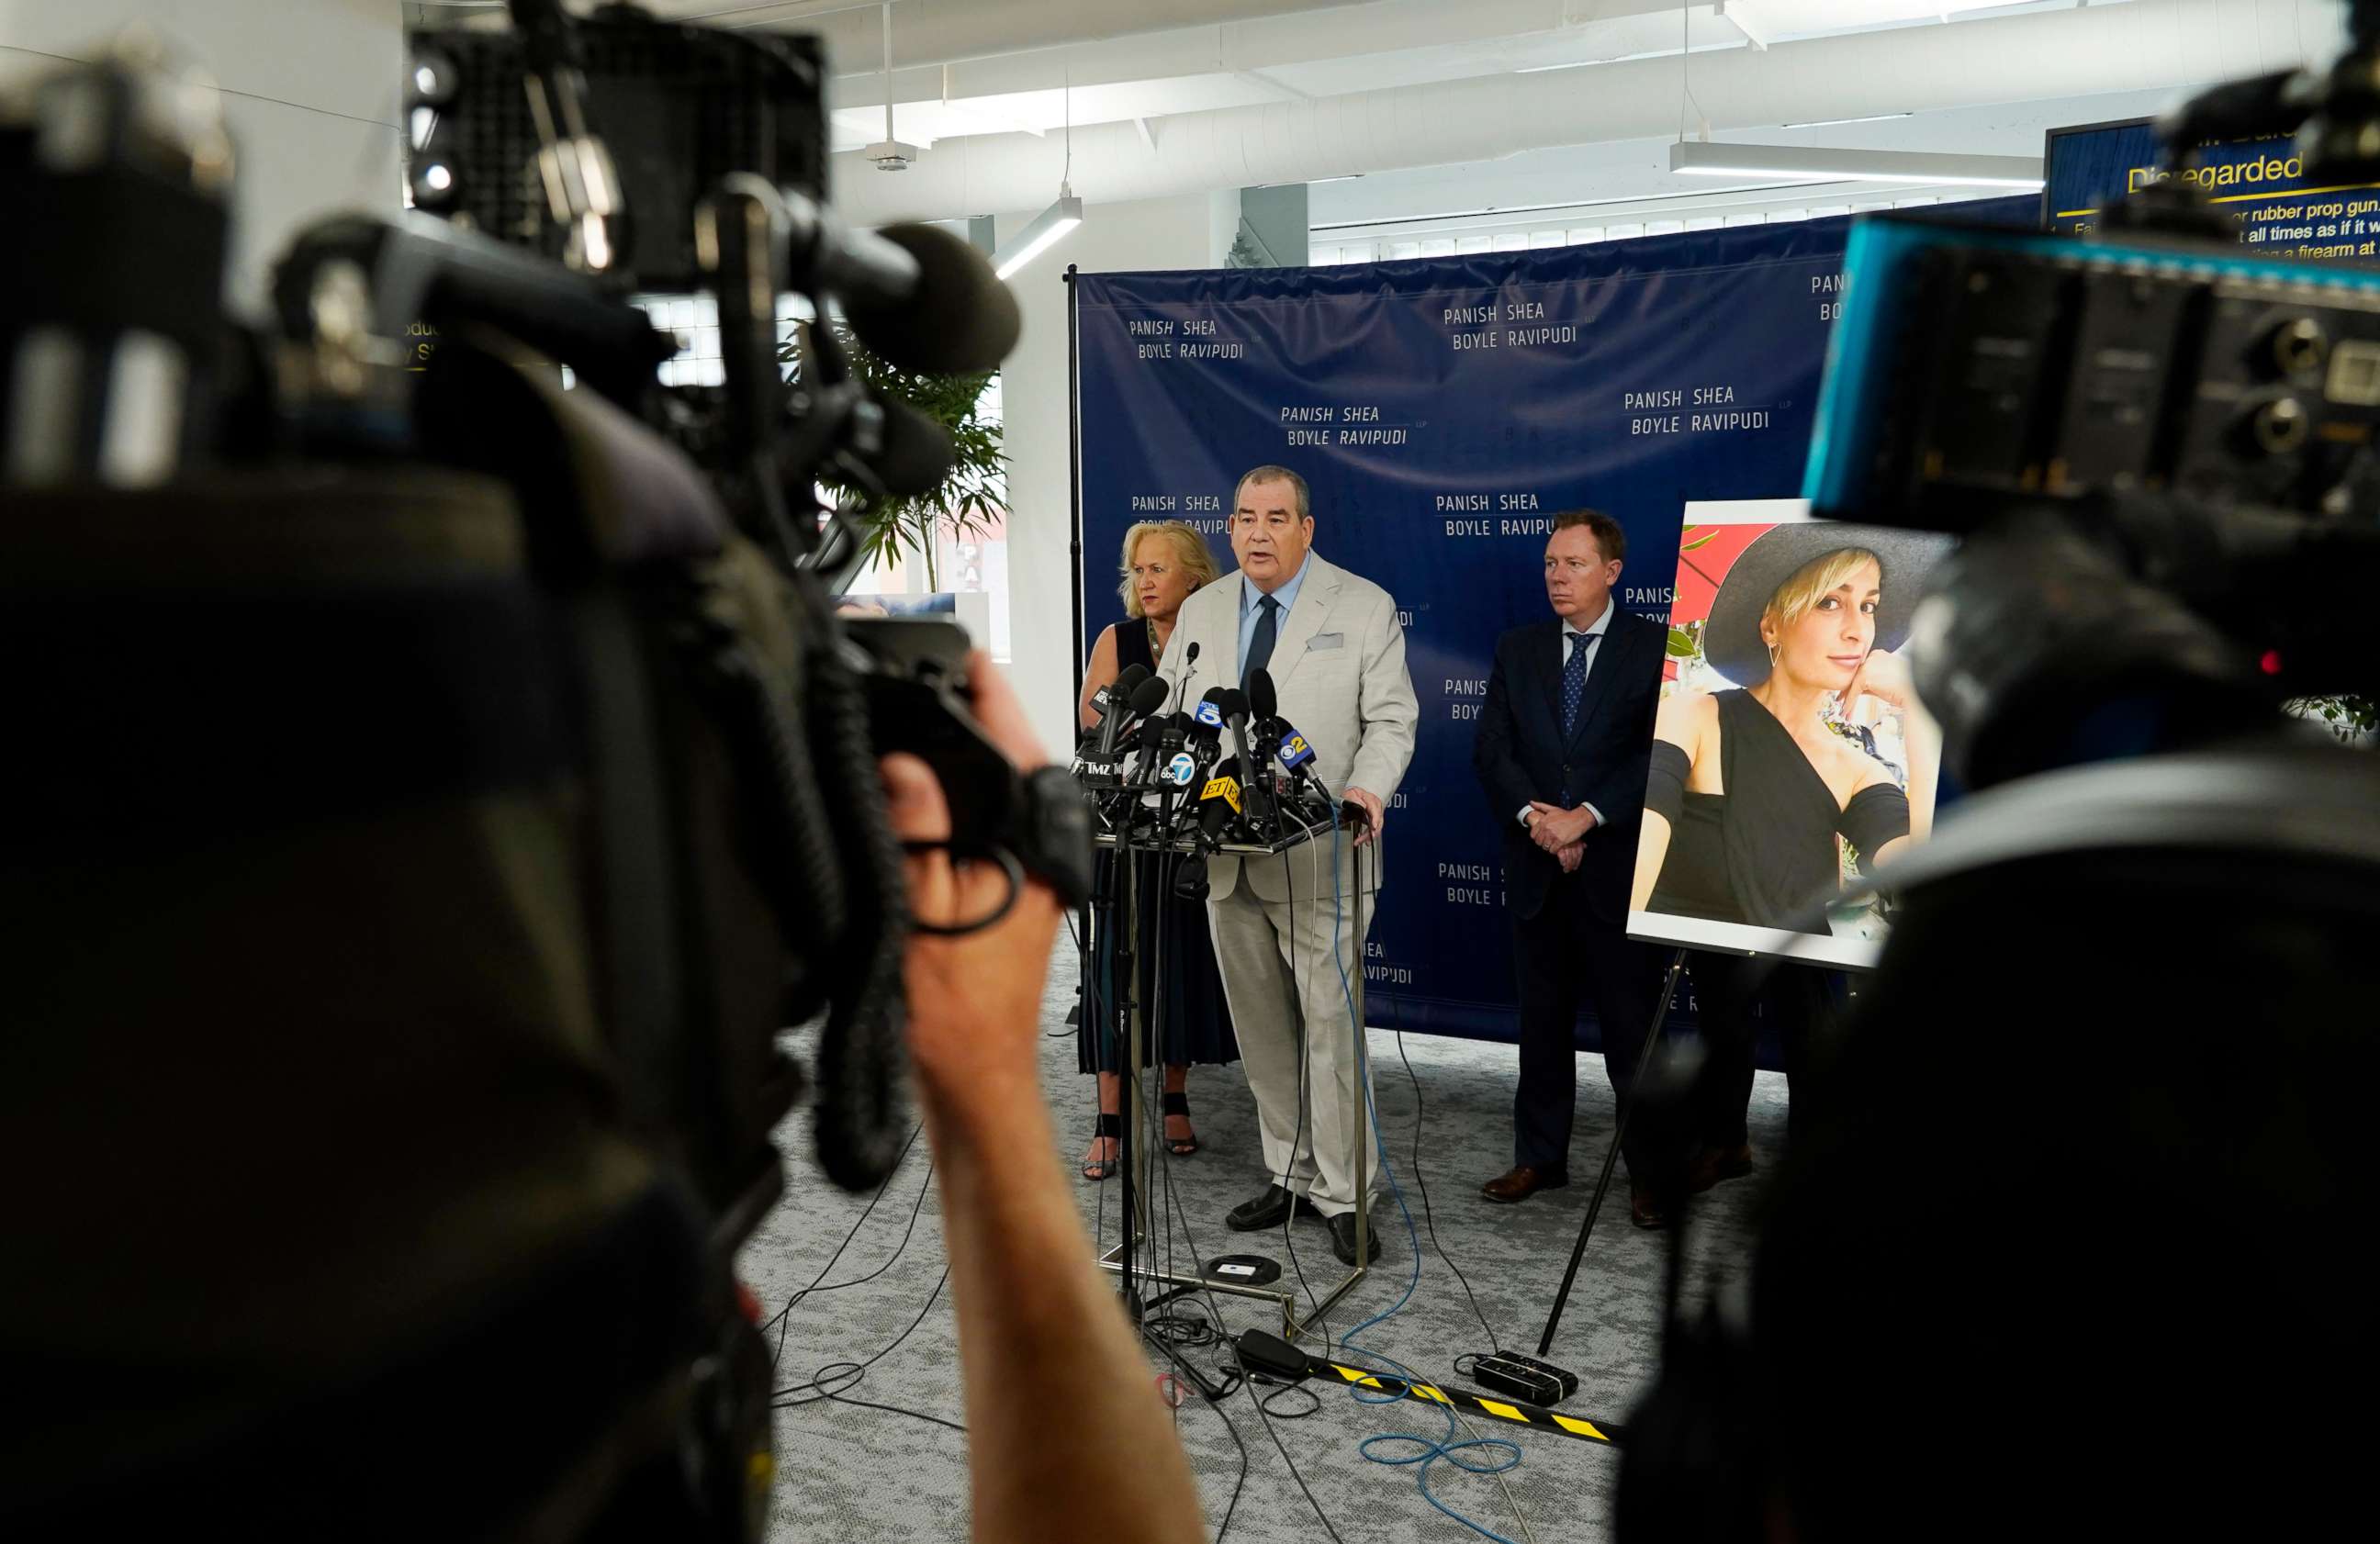 PHOTO: Randi McGinn, from left, Brian Panish and Kevin Boyle, attorneys for the family of cinematographer Halyna Hutchins, stand next to a portrait of Hutchins during a news conference, Feb. 15, 2022, in Los Angeles.